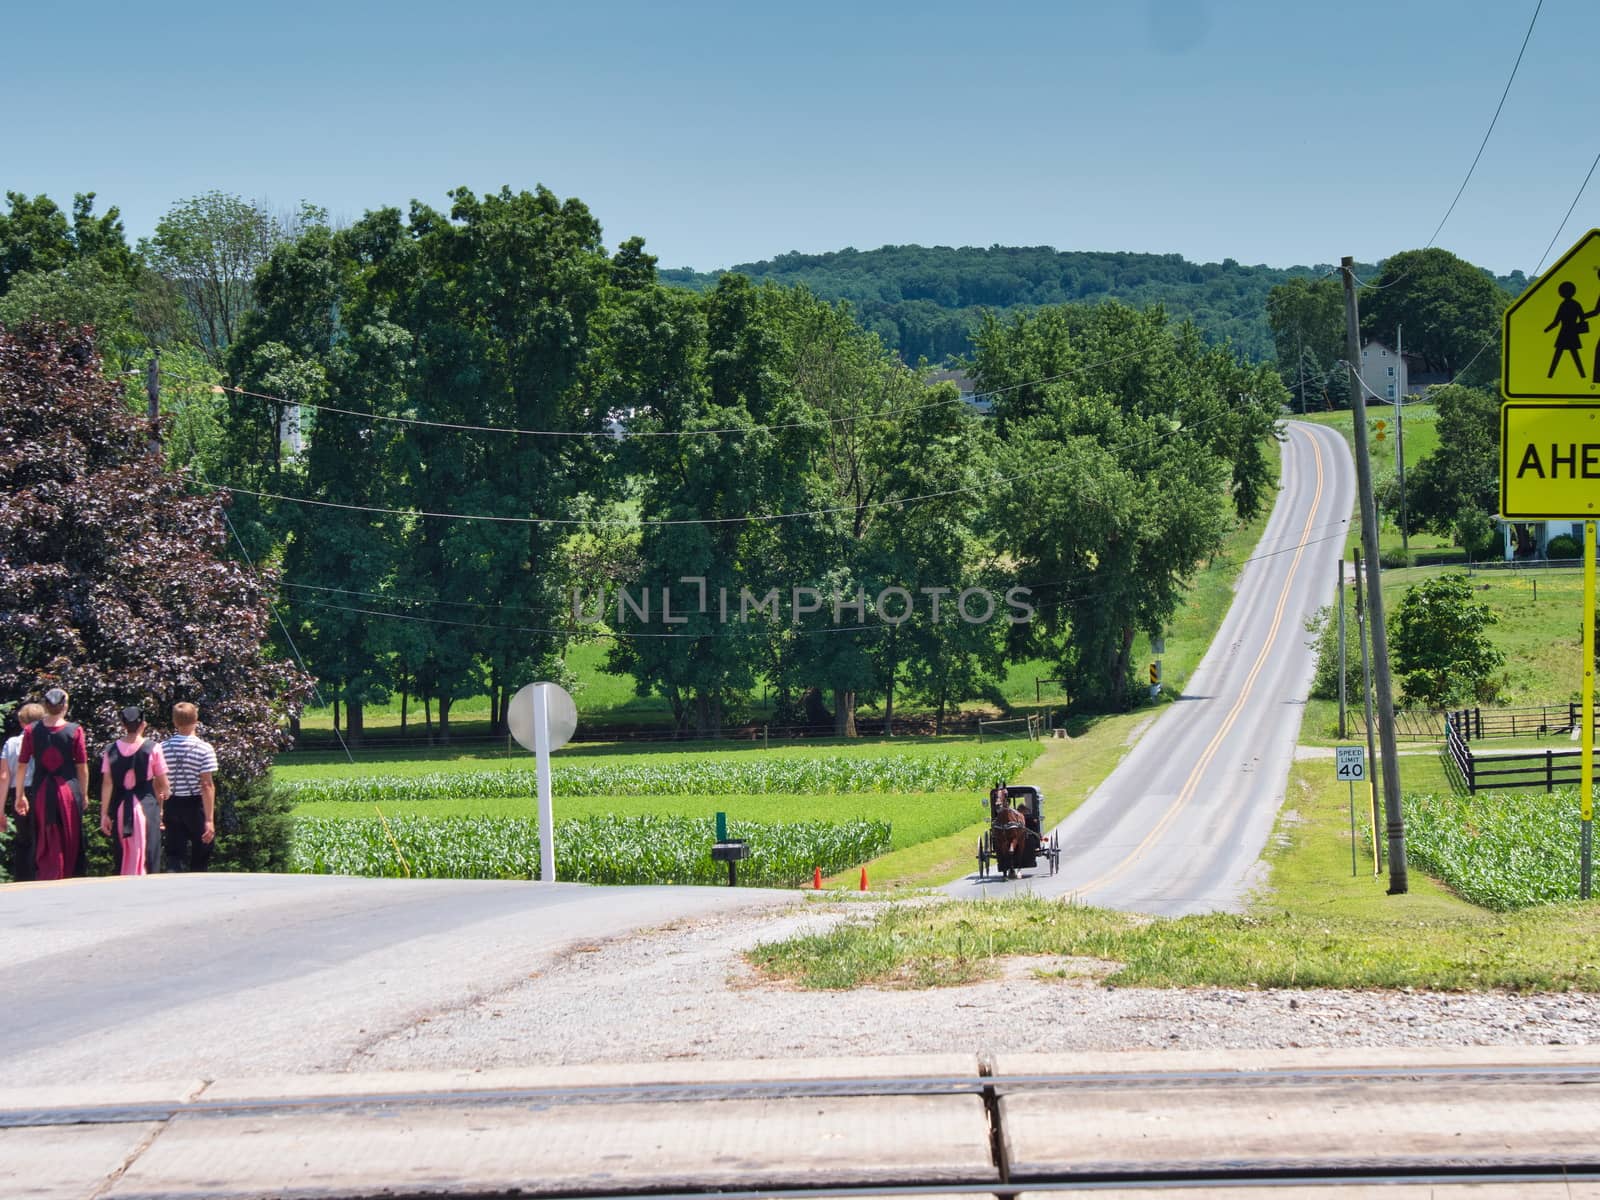 Amish Teenagers Walking Along Train Tracks with a Horse and Buggy Approaching in Countryside on a Sunny Day by actionphoto50